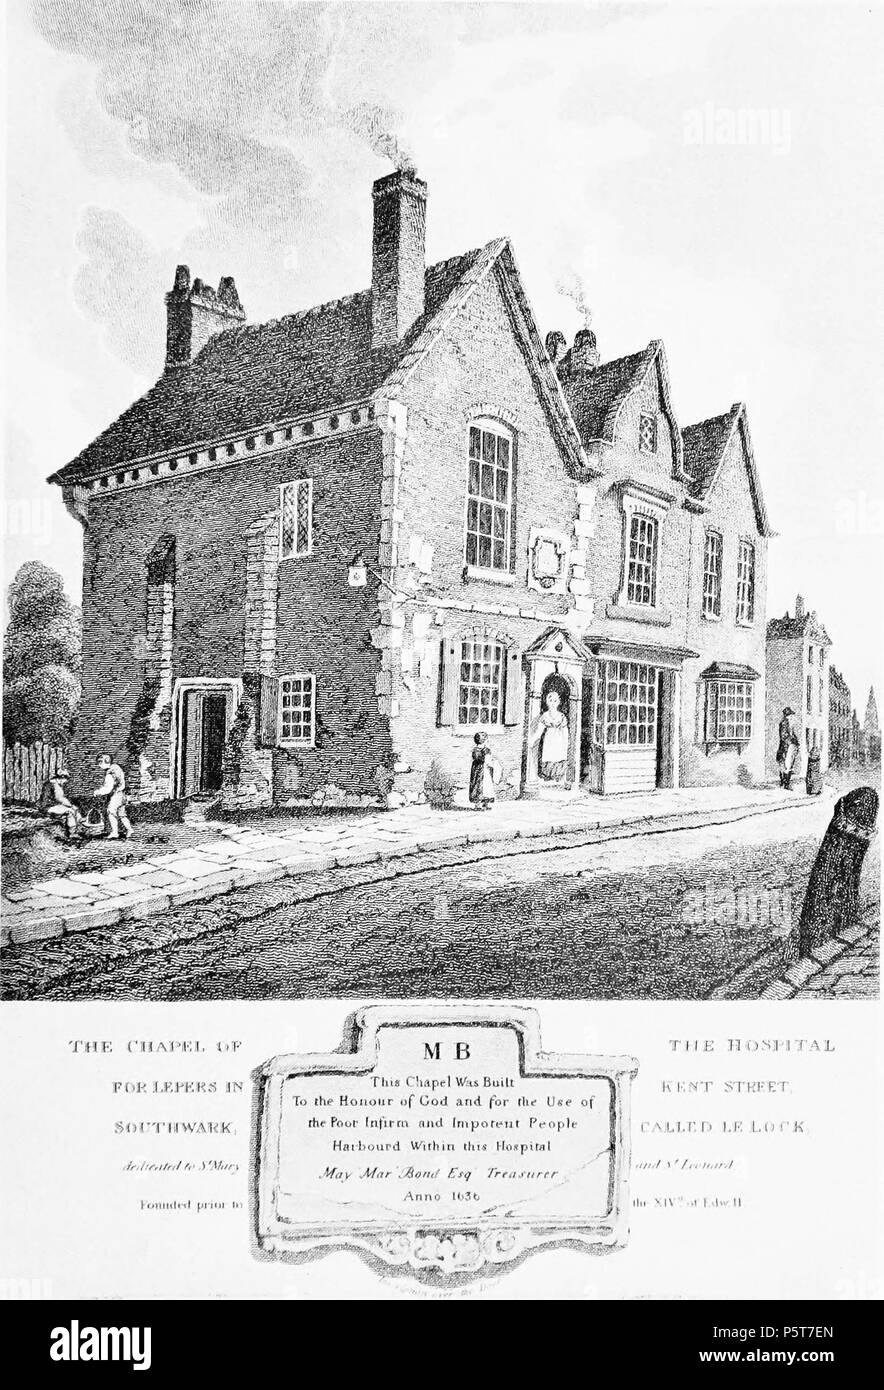 N/A. Chapel of the Hospital for Lepers in Kent Street, Southwark, called Le Lock. Illustration from Medieval London by Sir Walter Besant, published in 1906. More info here. 1813. C. John M. Whichelo 324 Chapel of the Hospital for Lepers in Kent Street, Southwark, called Le Lock, 1813 Stock Photo